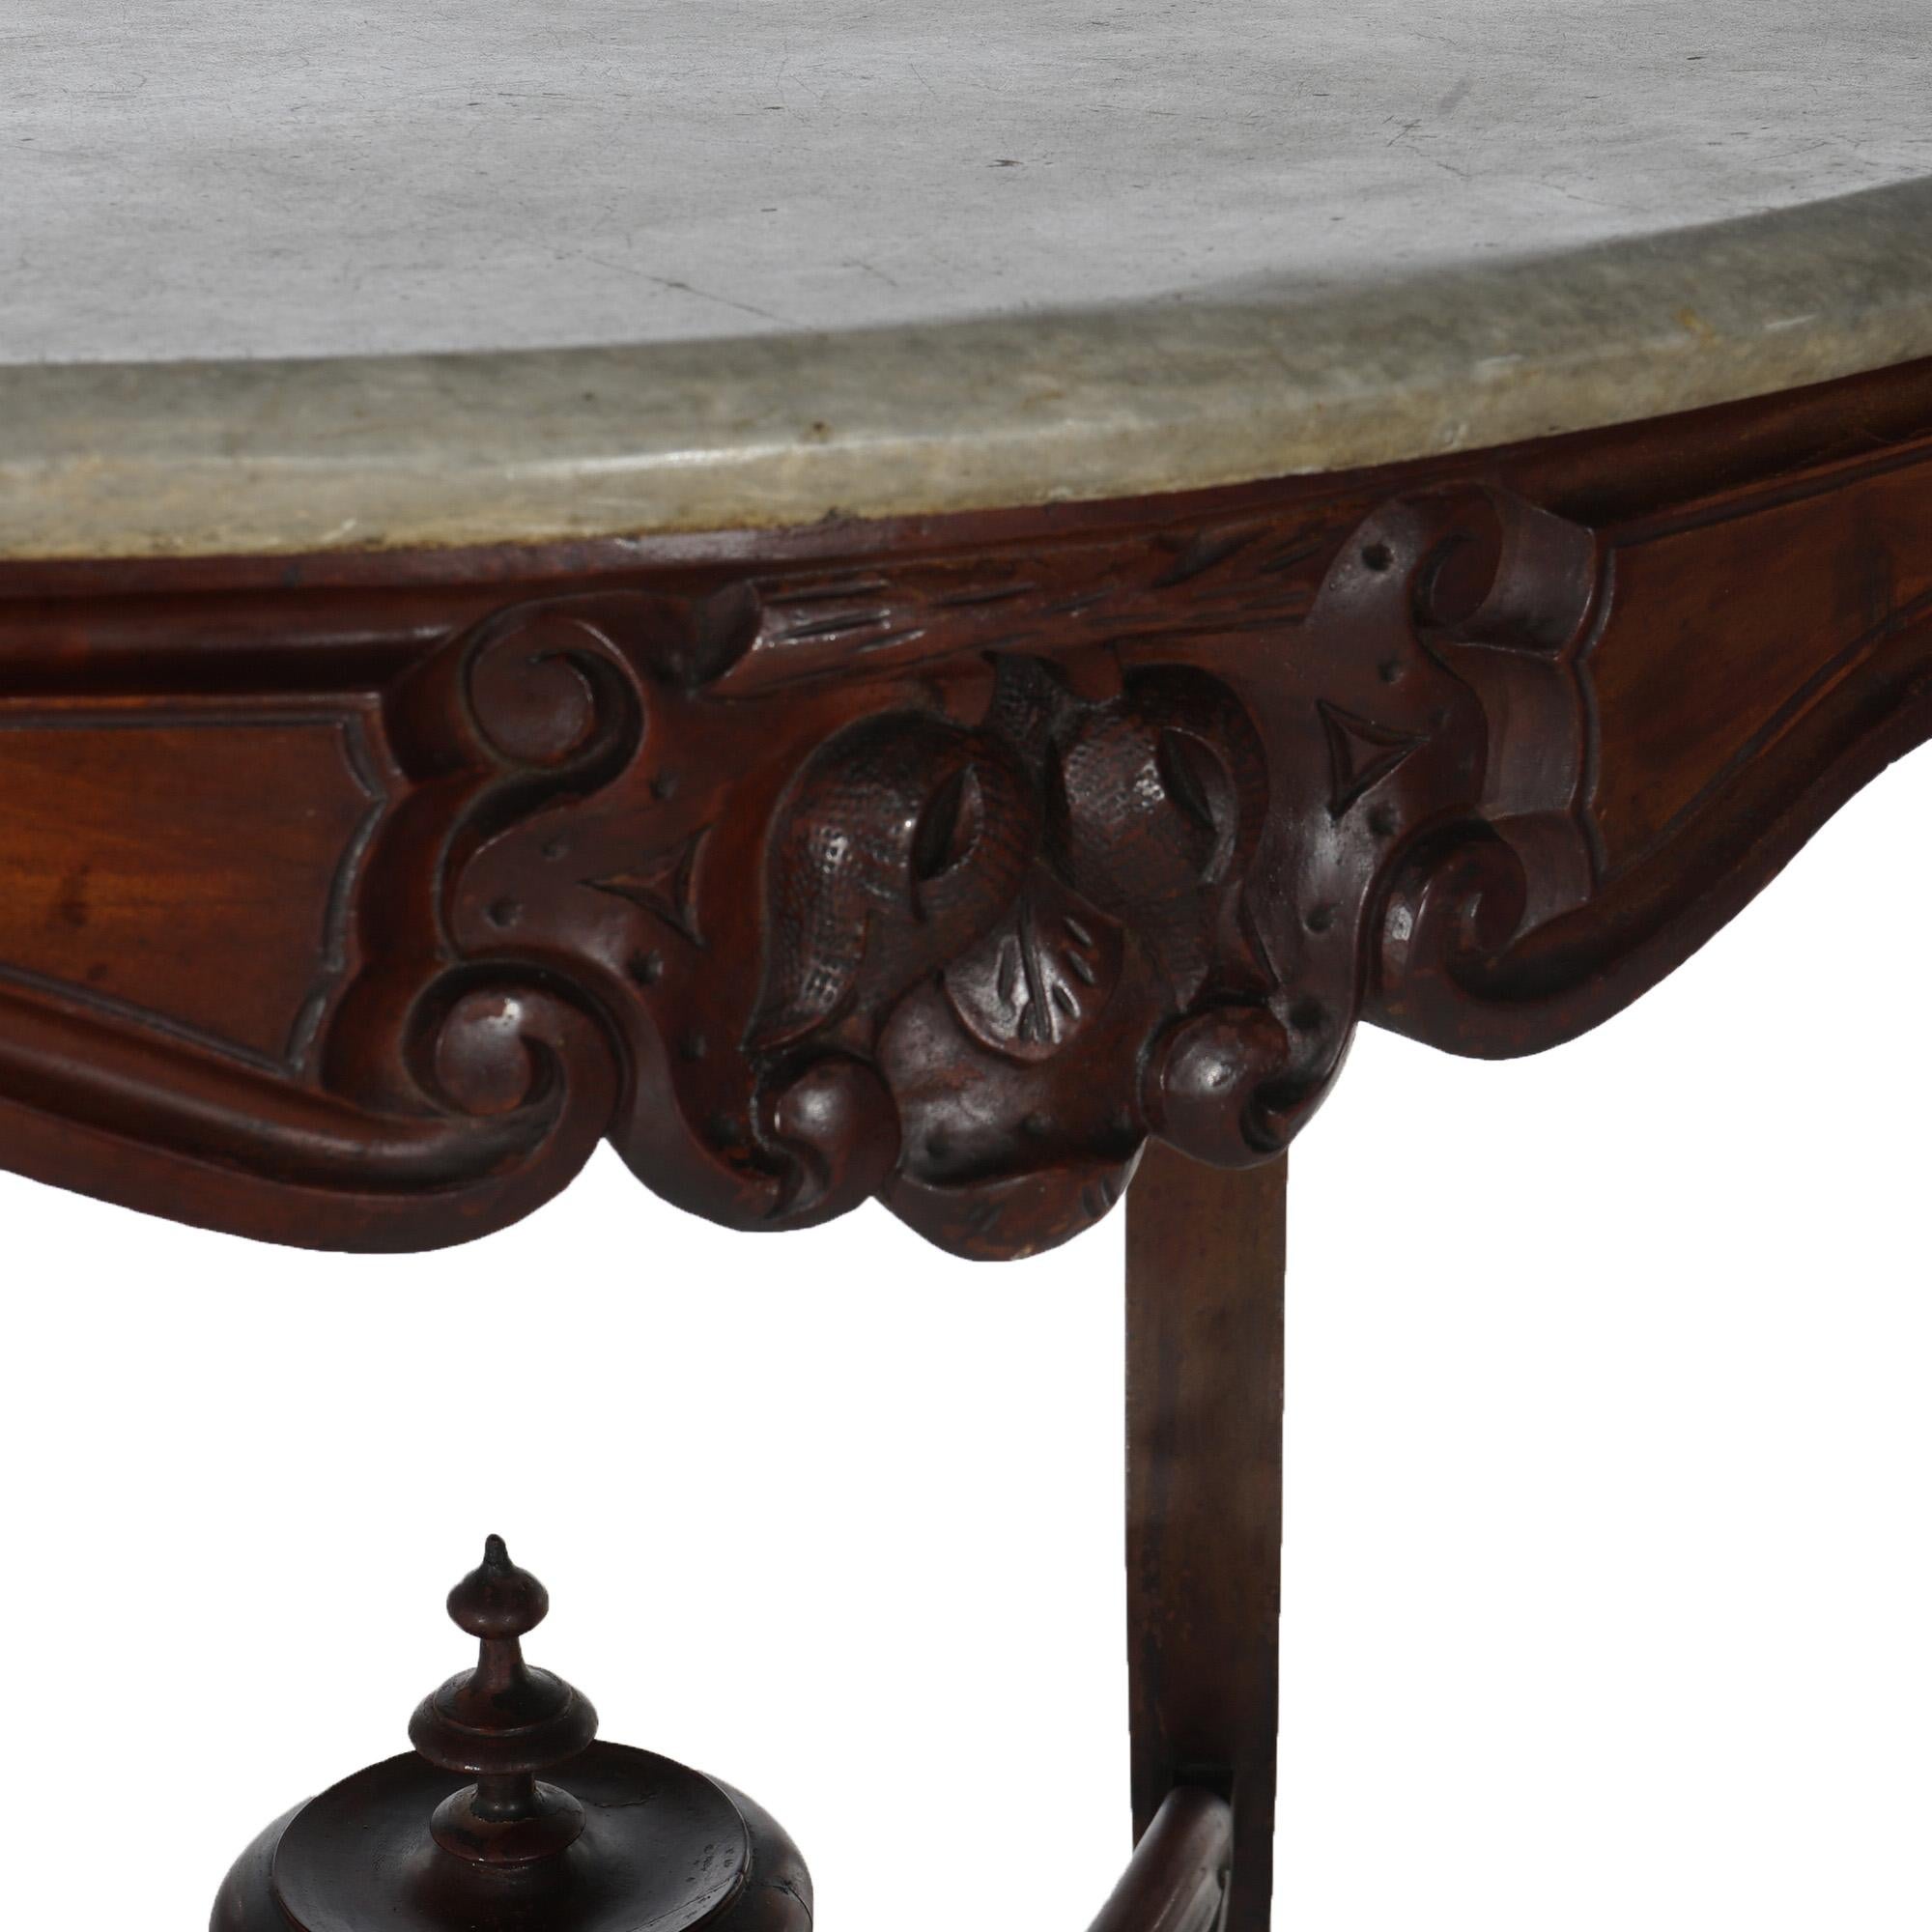 ***Ask About Reduced In-House Delivery Rates - Reliable Professional Service & Fully Insured***

An antique Victorian parlor table offers shaped and beveled marble top over walnut base having carved foliate, nut and scroll elements, raised on